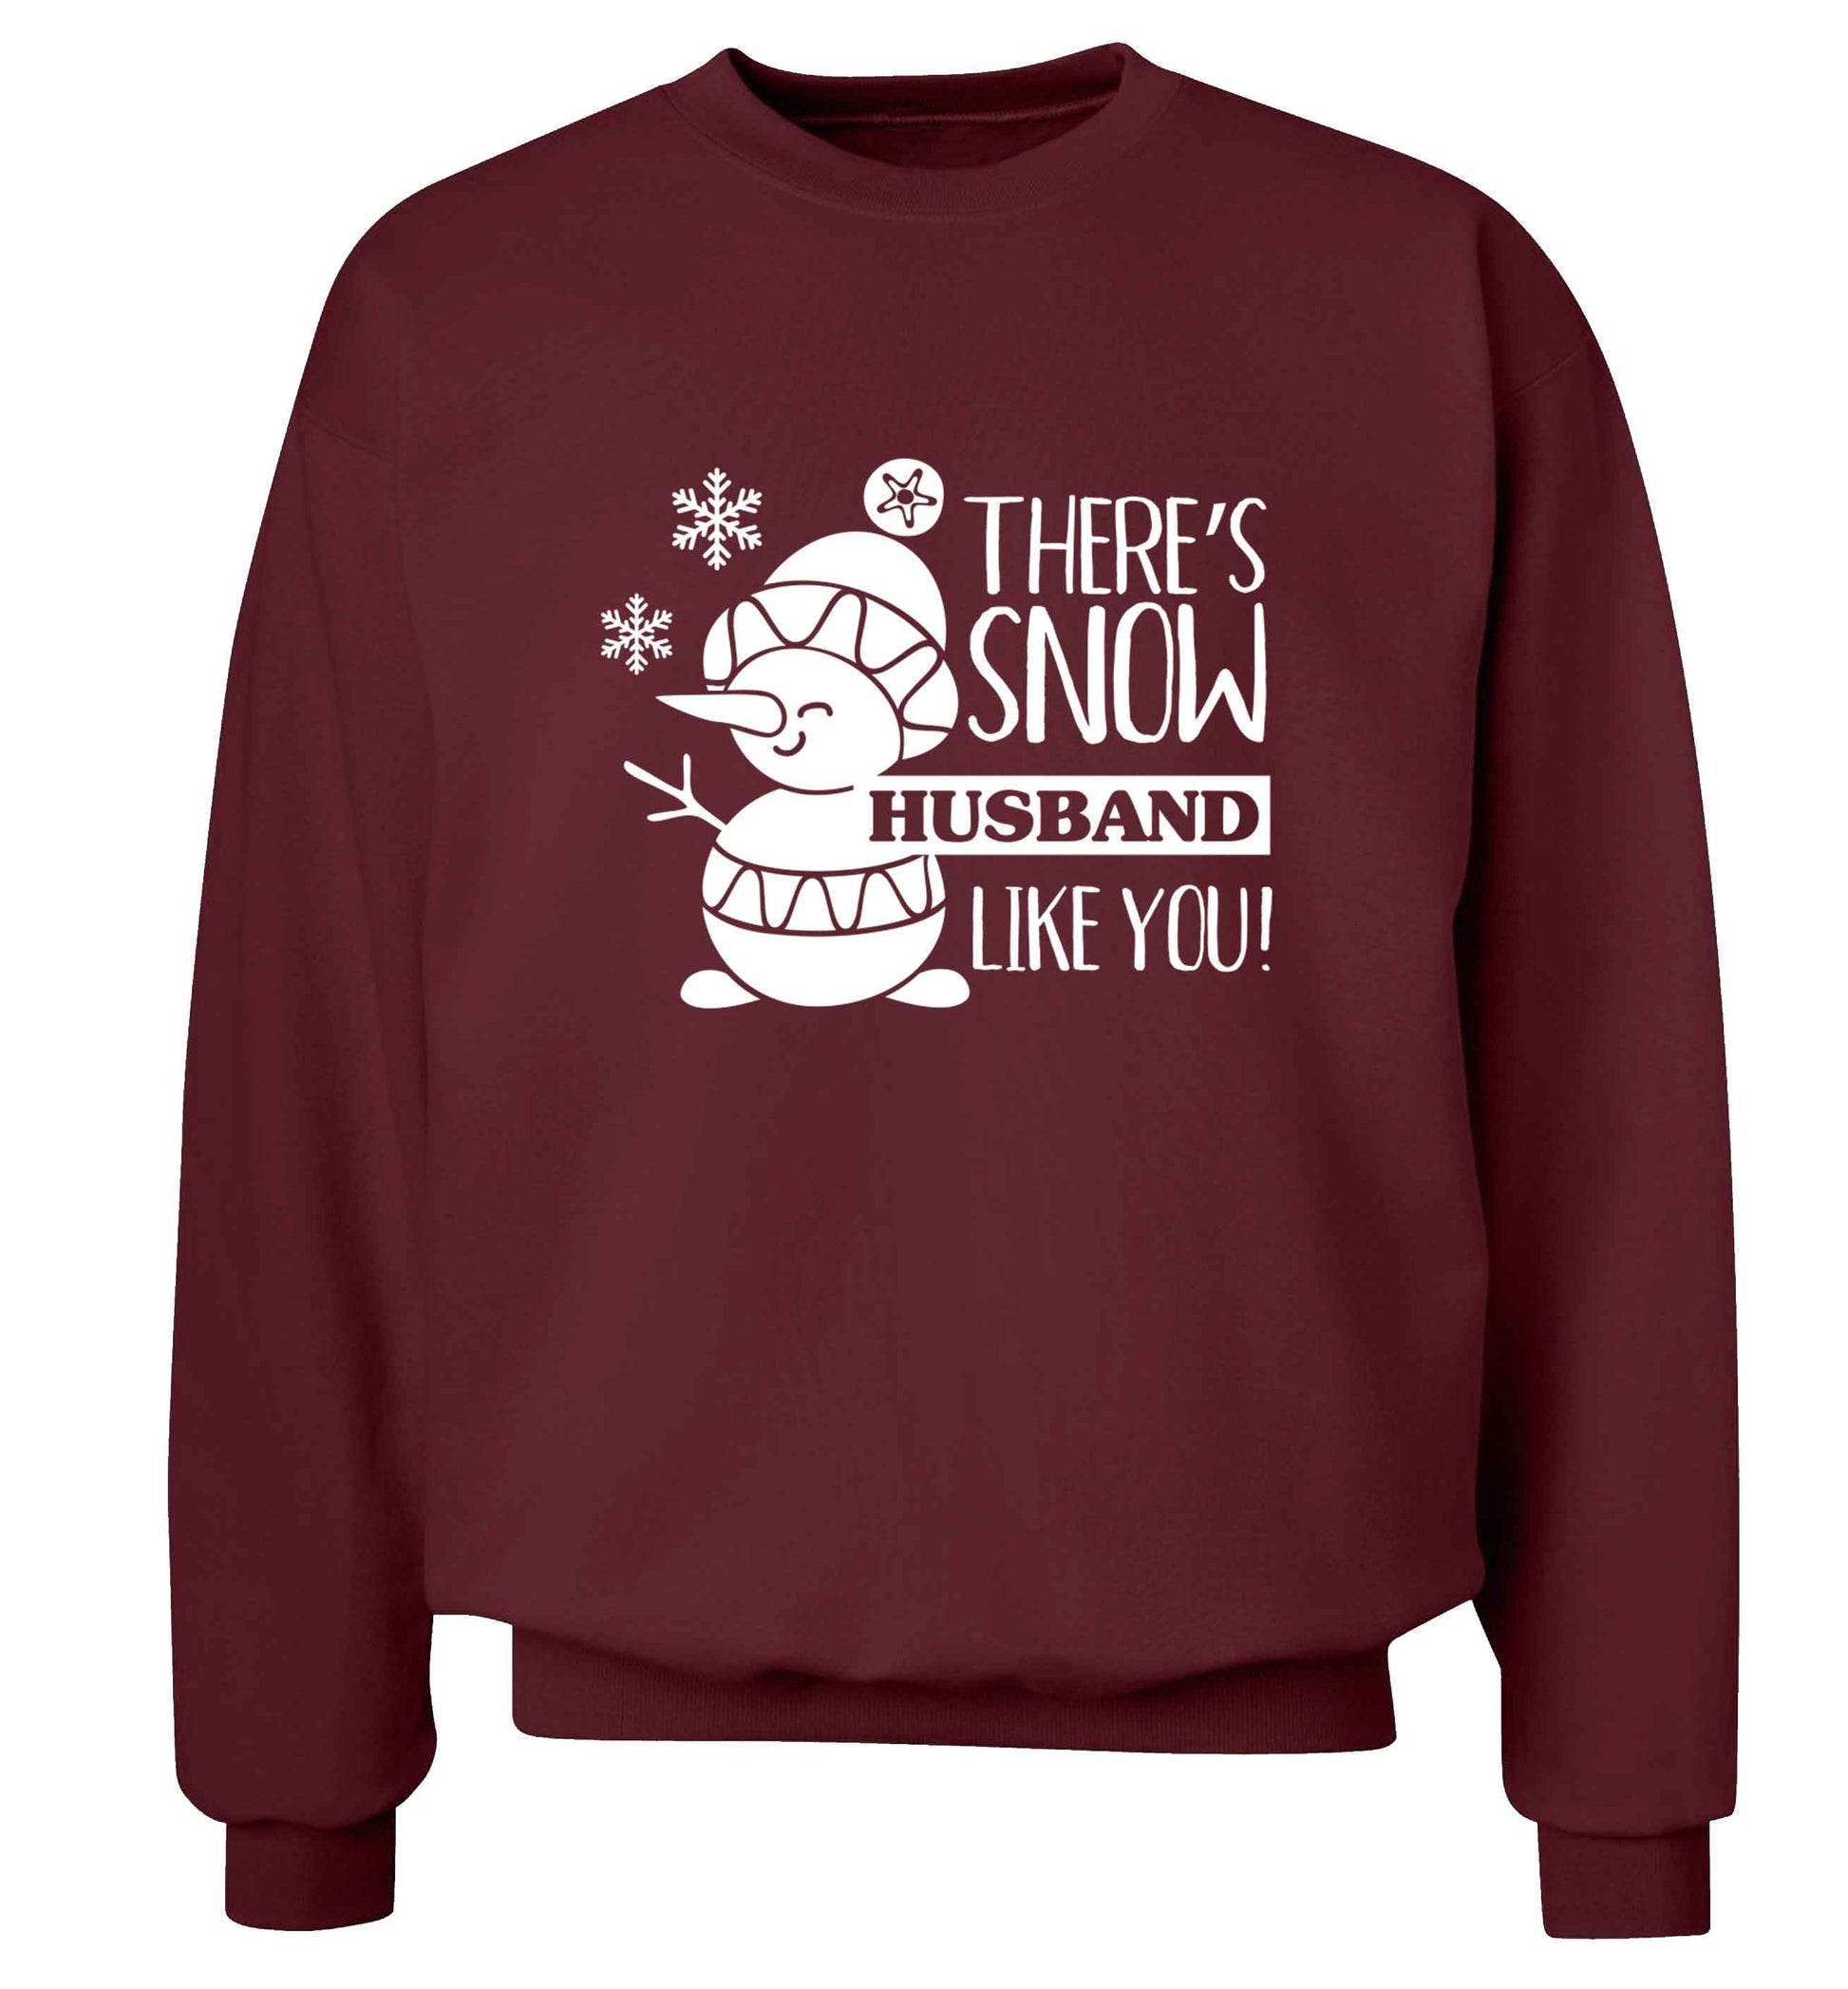 There's snow husband like you adult's unisex maroon sweater 2XL